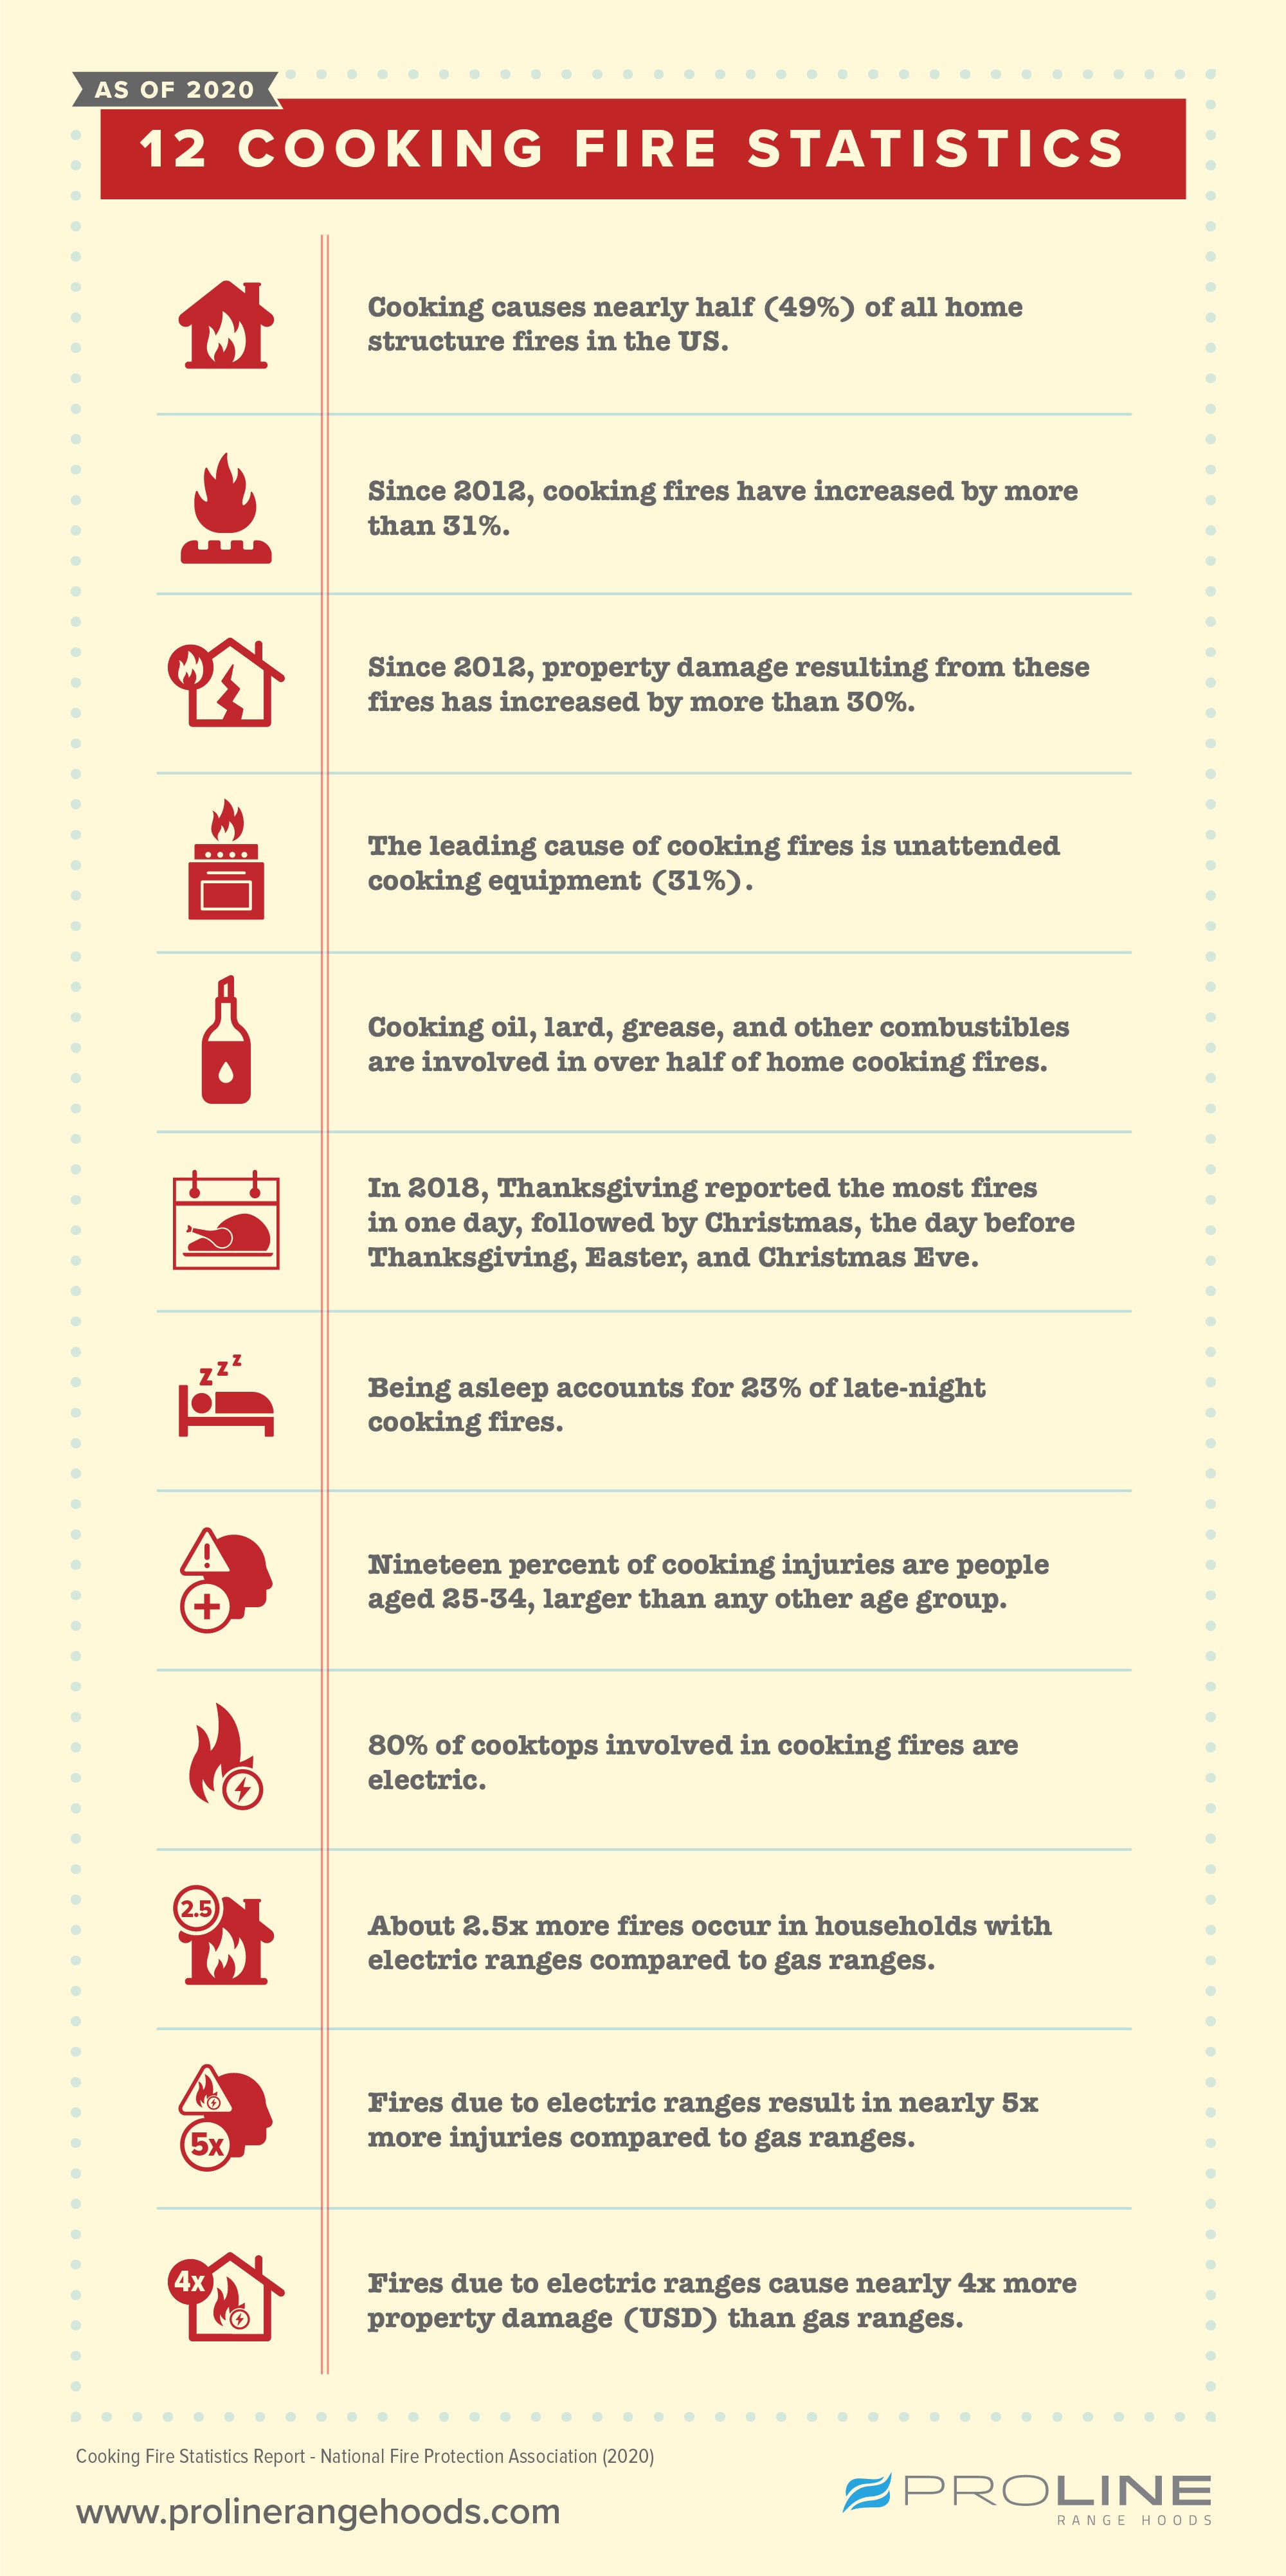 12 Cooking Fire Statistics infographic